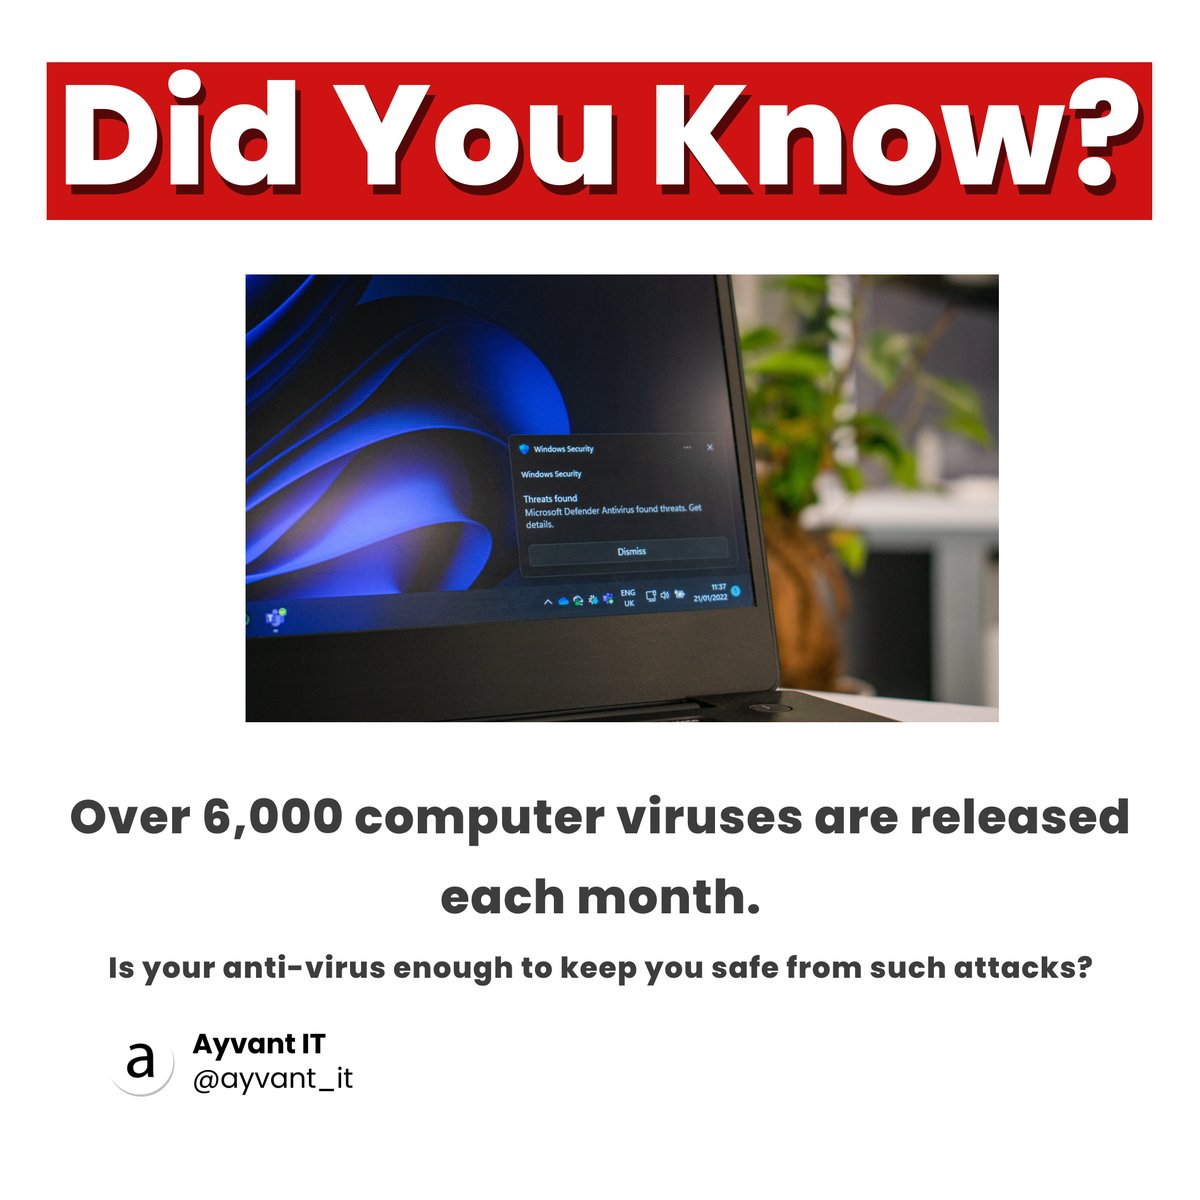 Did you know?

✅ Visit Our website for more - ayvant.com

✅ Follow us for more content

#didyouknow #facts #virus #computer #antivirus #computervirus #internet #internetsecurity #antivirus #informationsecurity #cybersecurity #itriskmanagement #ayvant